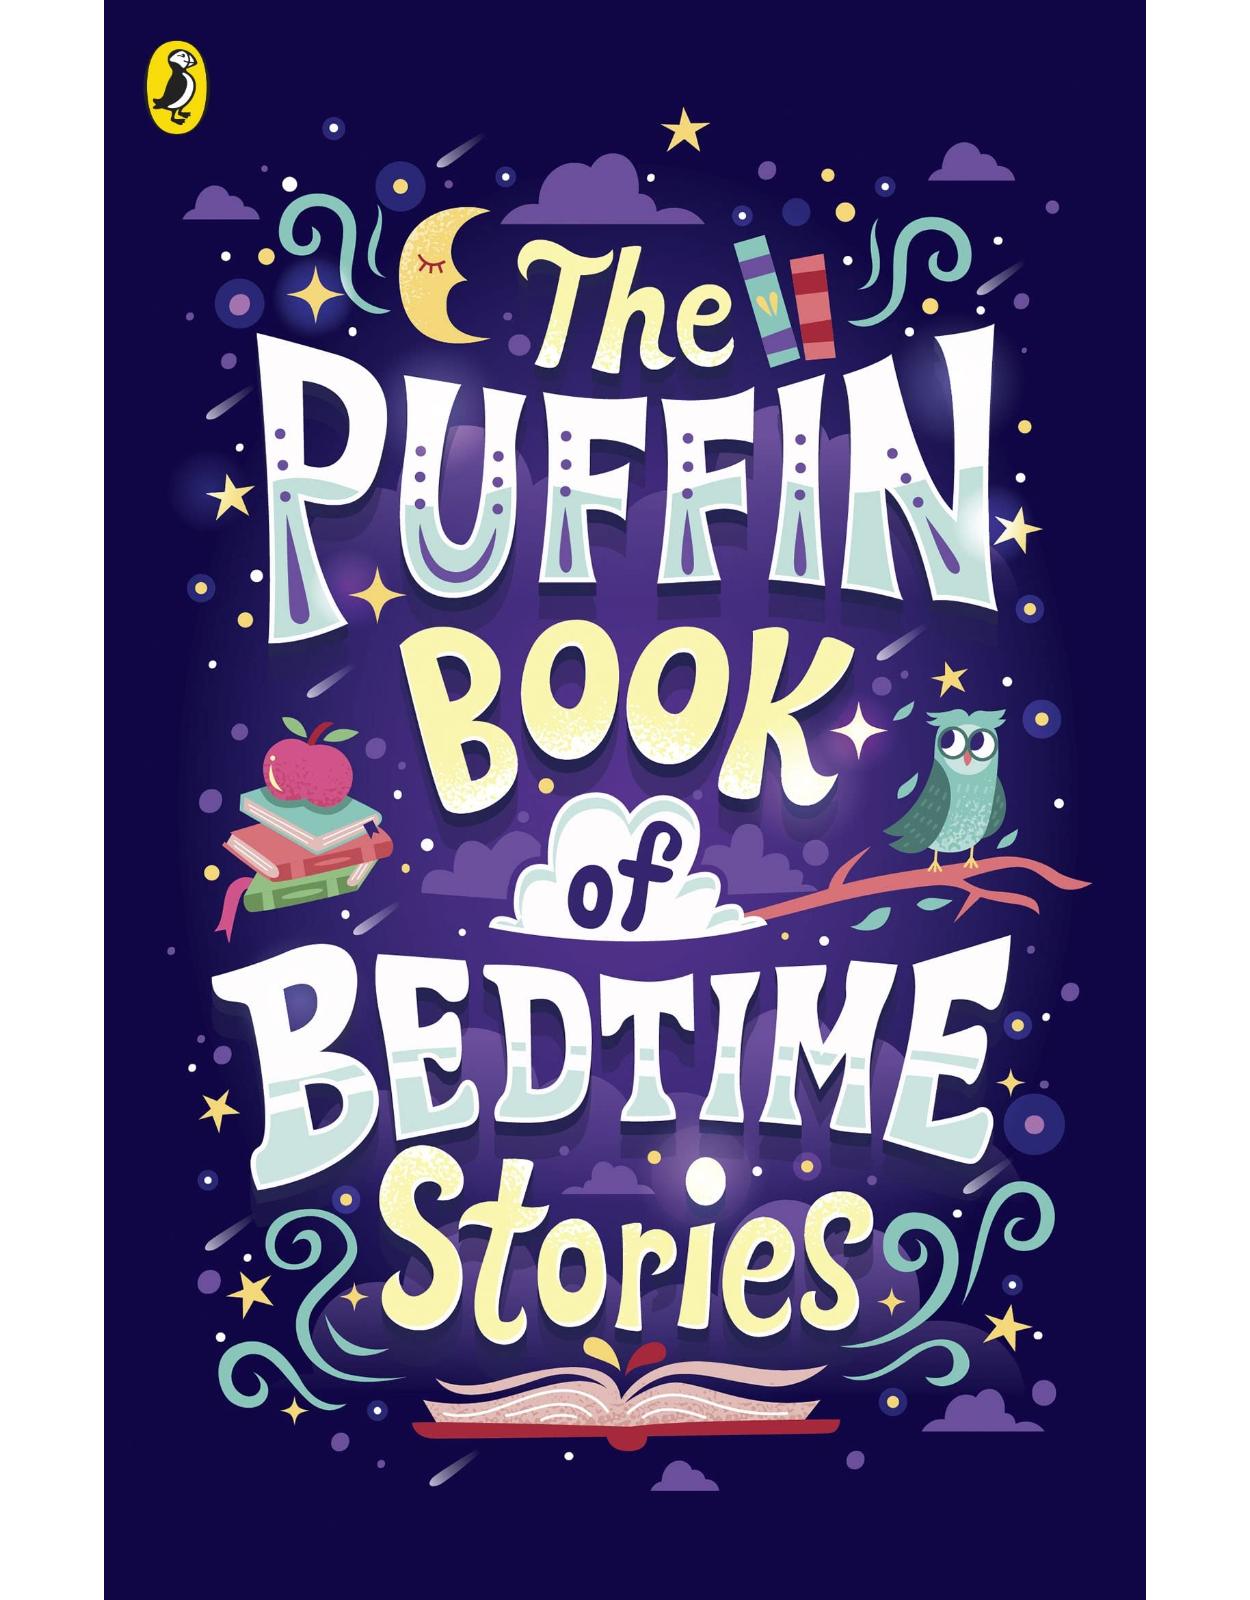 The Puffin Book of Bedtime Stories: Big Dreams for Every Child